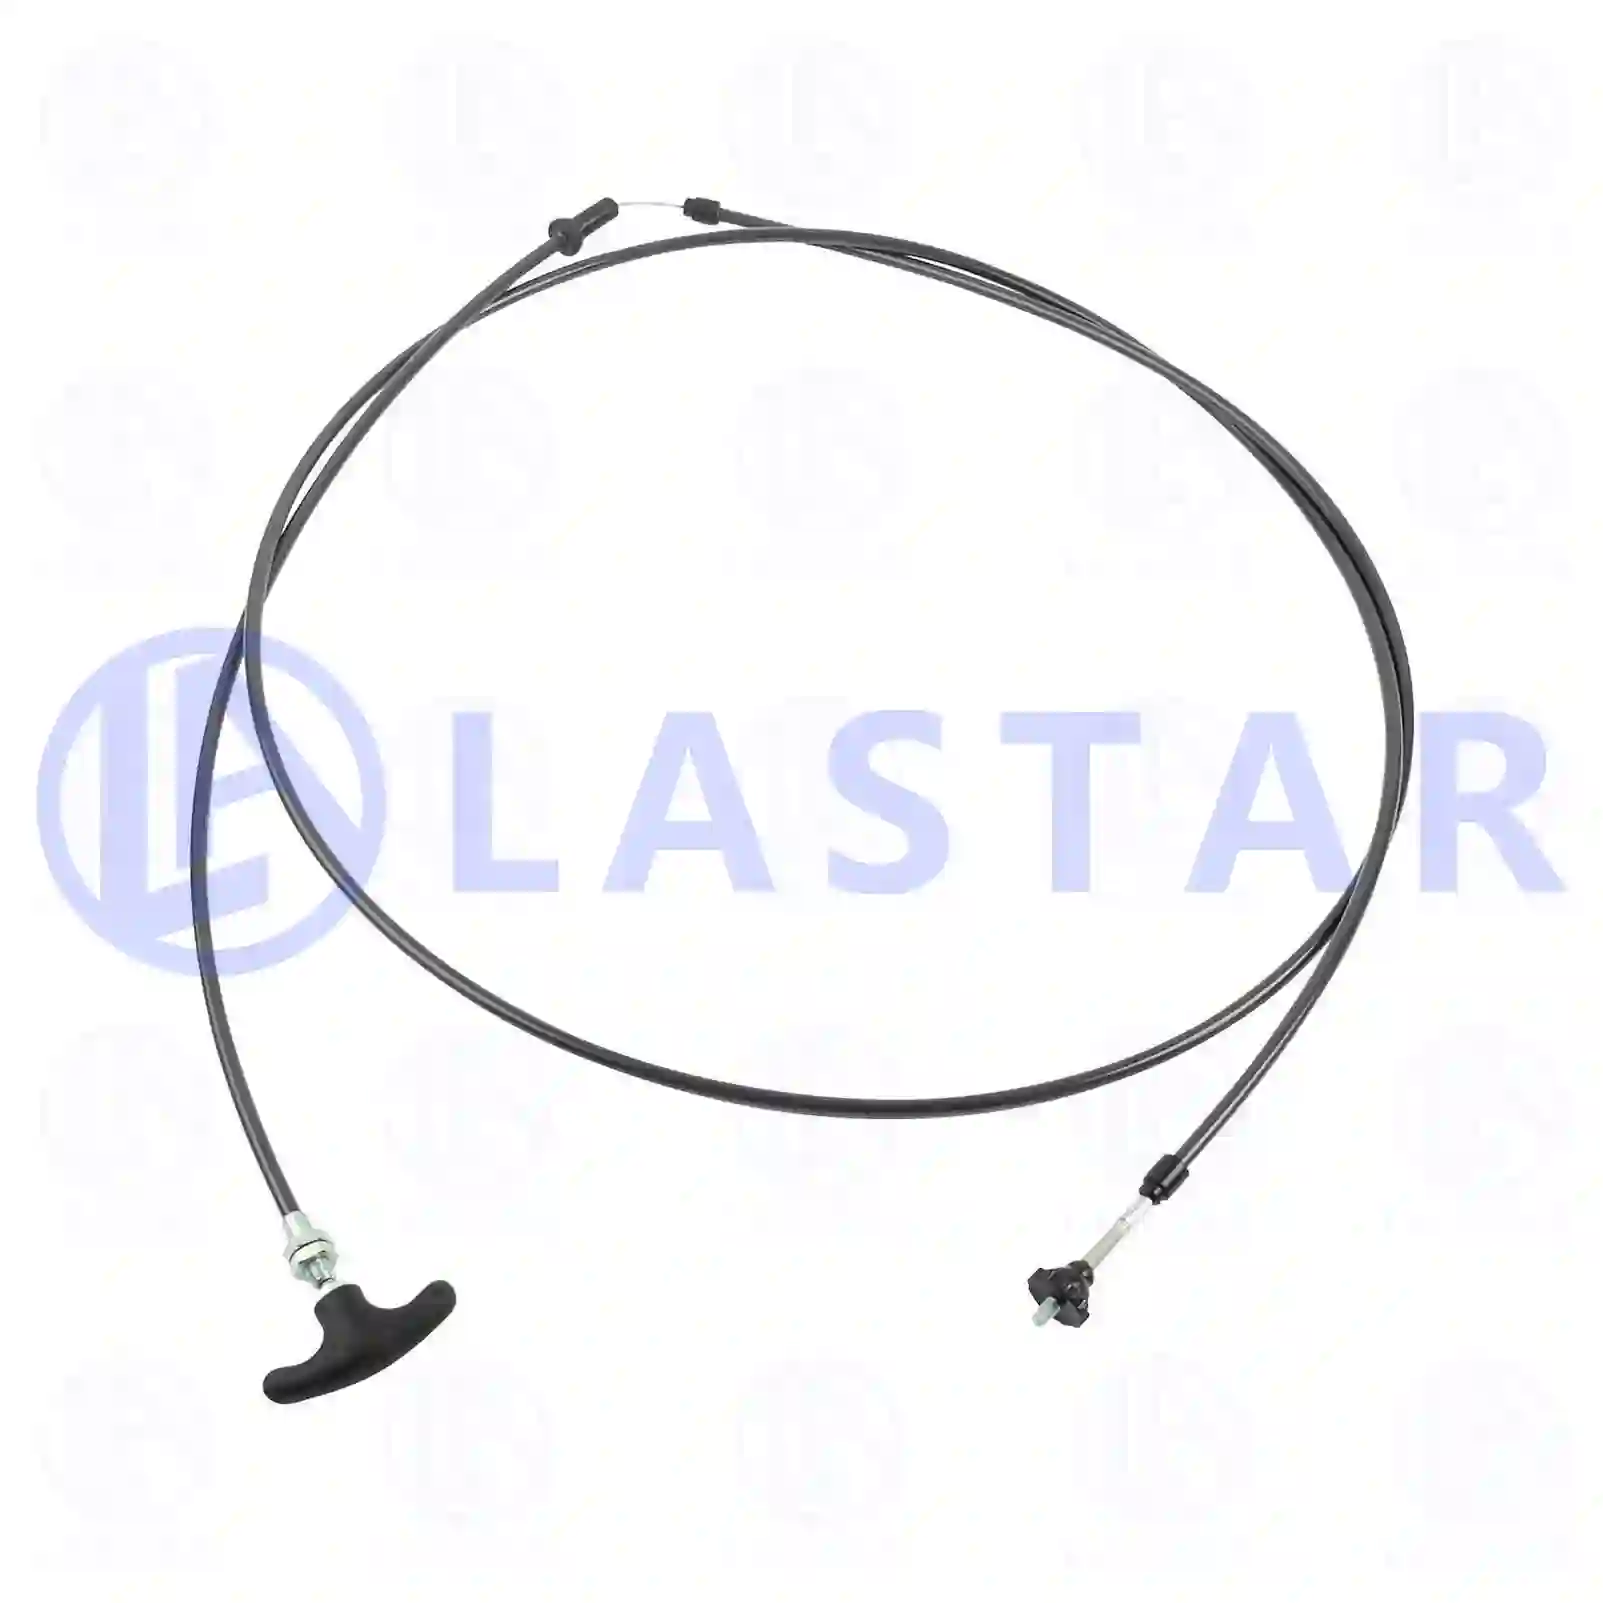 Control wire, front grill slot, 77718133, 3798235, 3798235 ||  77718133 Lastar Spare Part | Truck Spare Parts, Auotomotive Spare Parts Control wire, front grill slot, 77718133, 3798235, 3798235 ||  77718133 Lastar Spare Part | Truck Spare Parts, Auotomotive Spare Parts